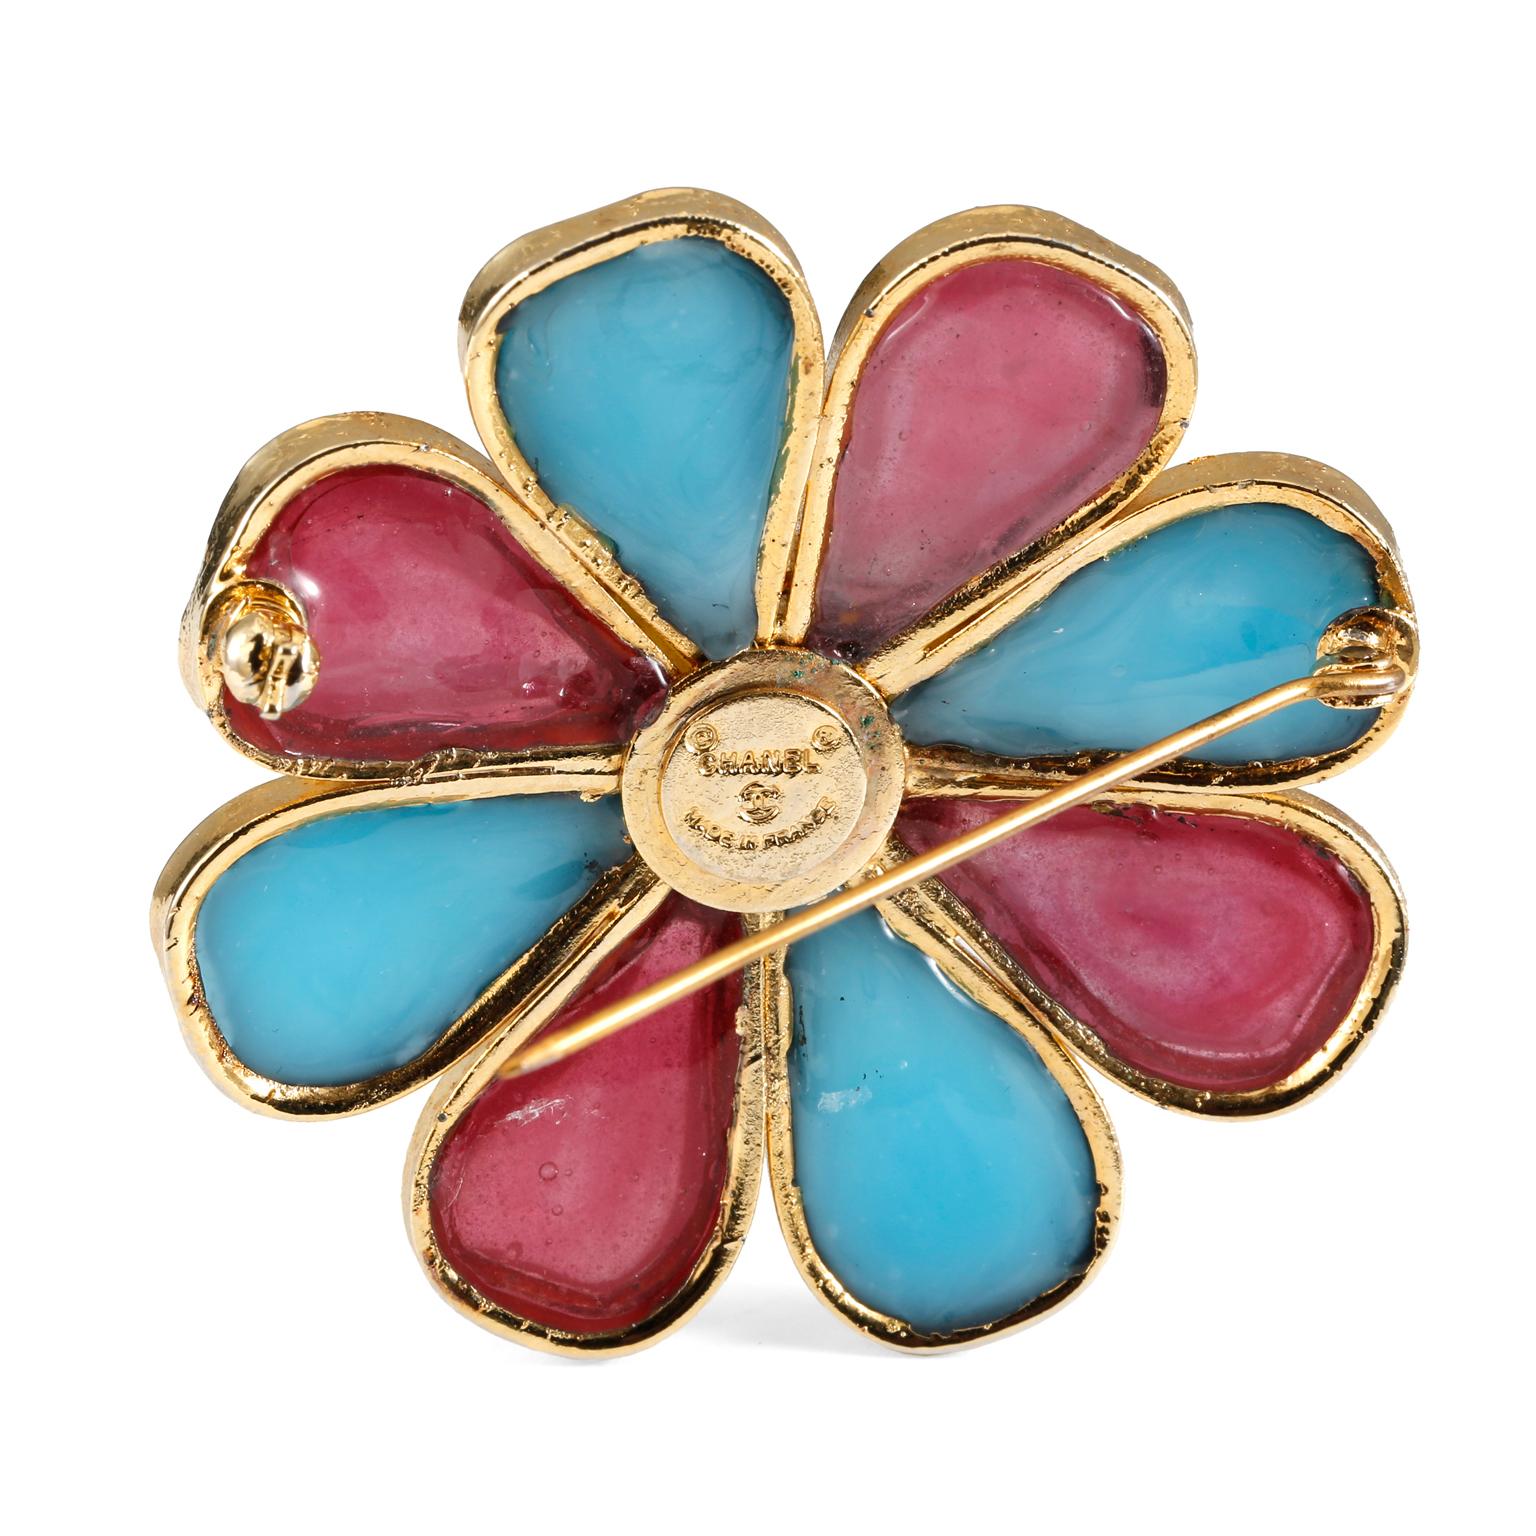 This authentic Chanel Blue and Red Gripoix Flower Pin is in excellent vintage condition from the 1970’s.  Alternating turquoise and pinky red Gripoix glass petals surround a yellow center with gold tone metal surround.   Made in